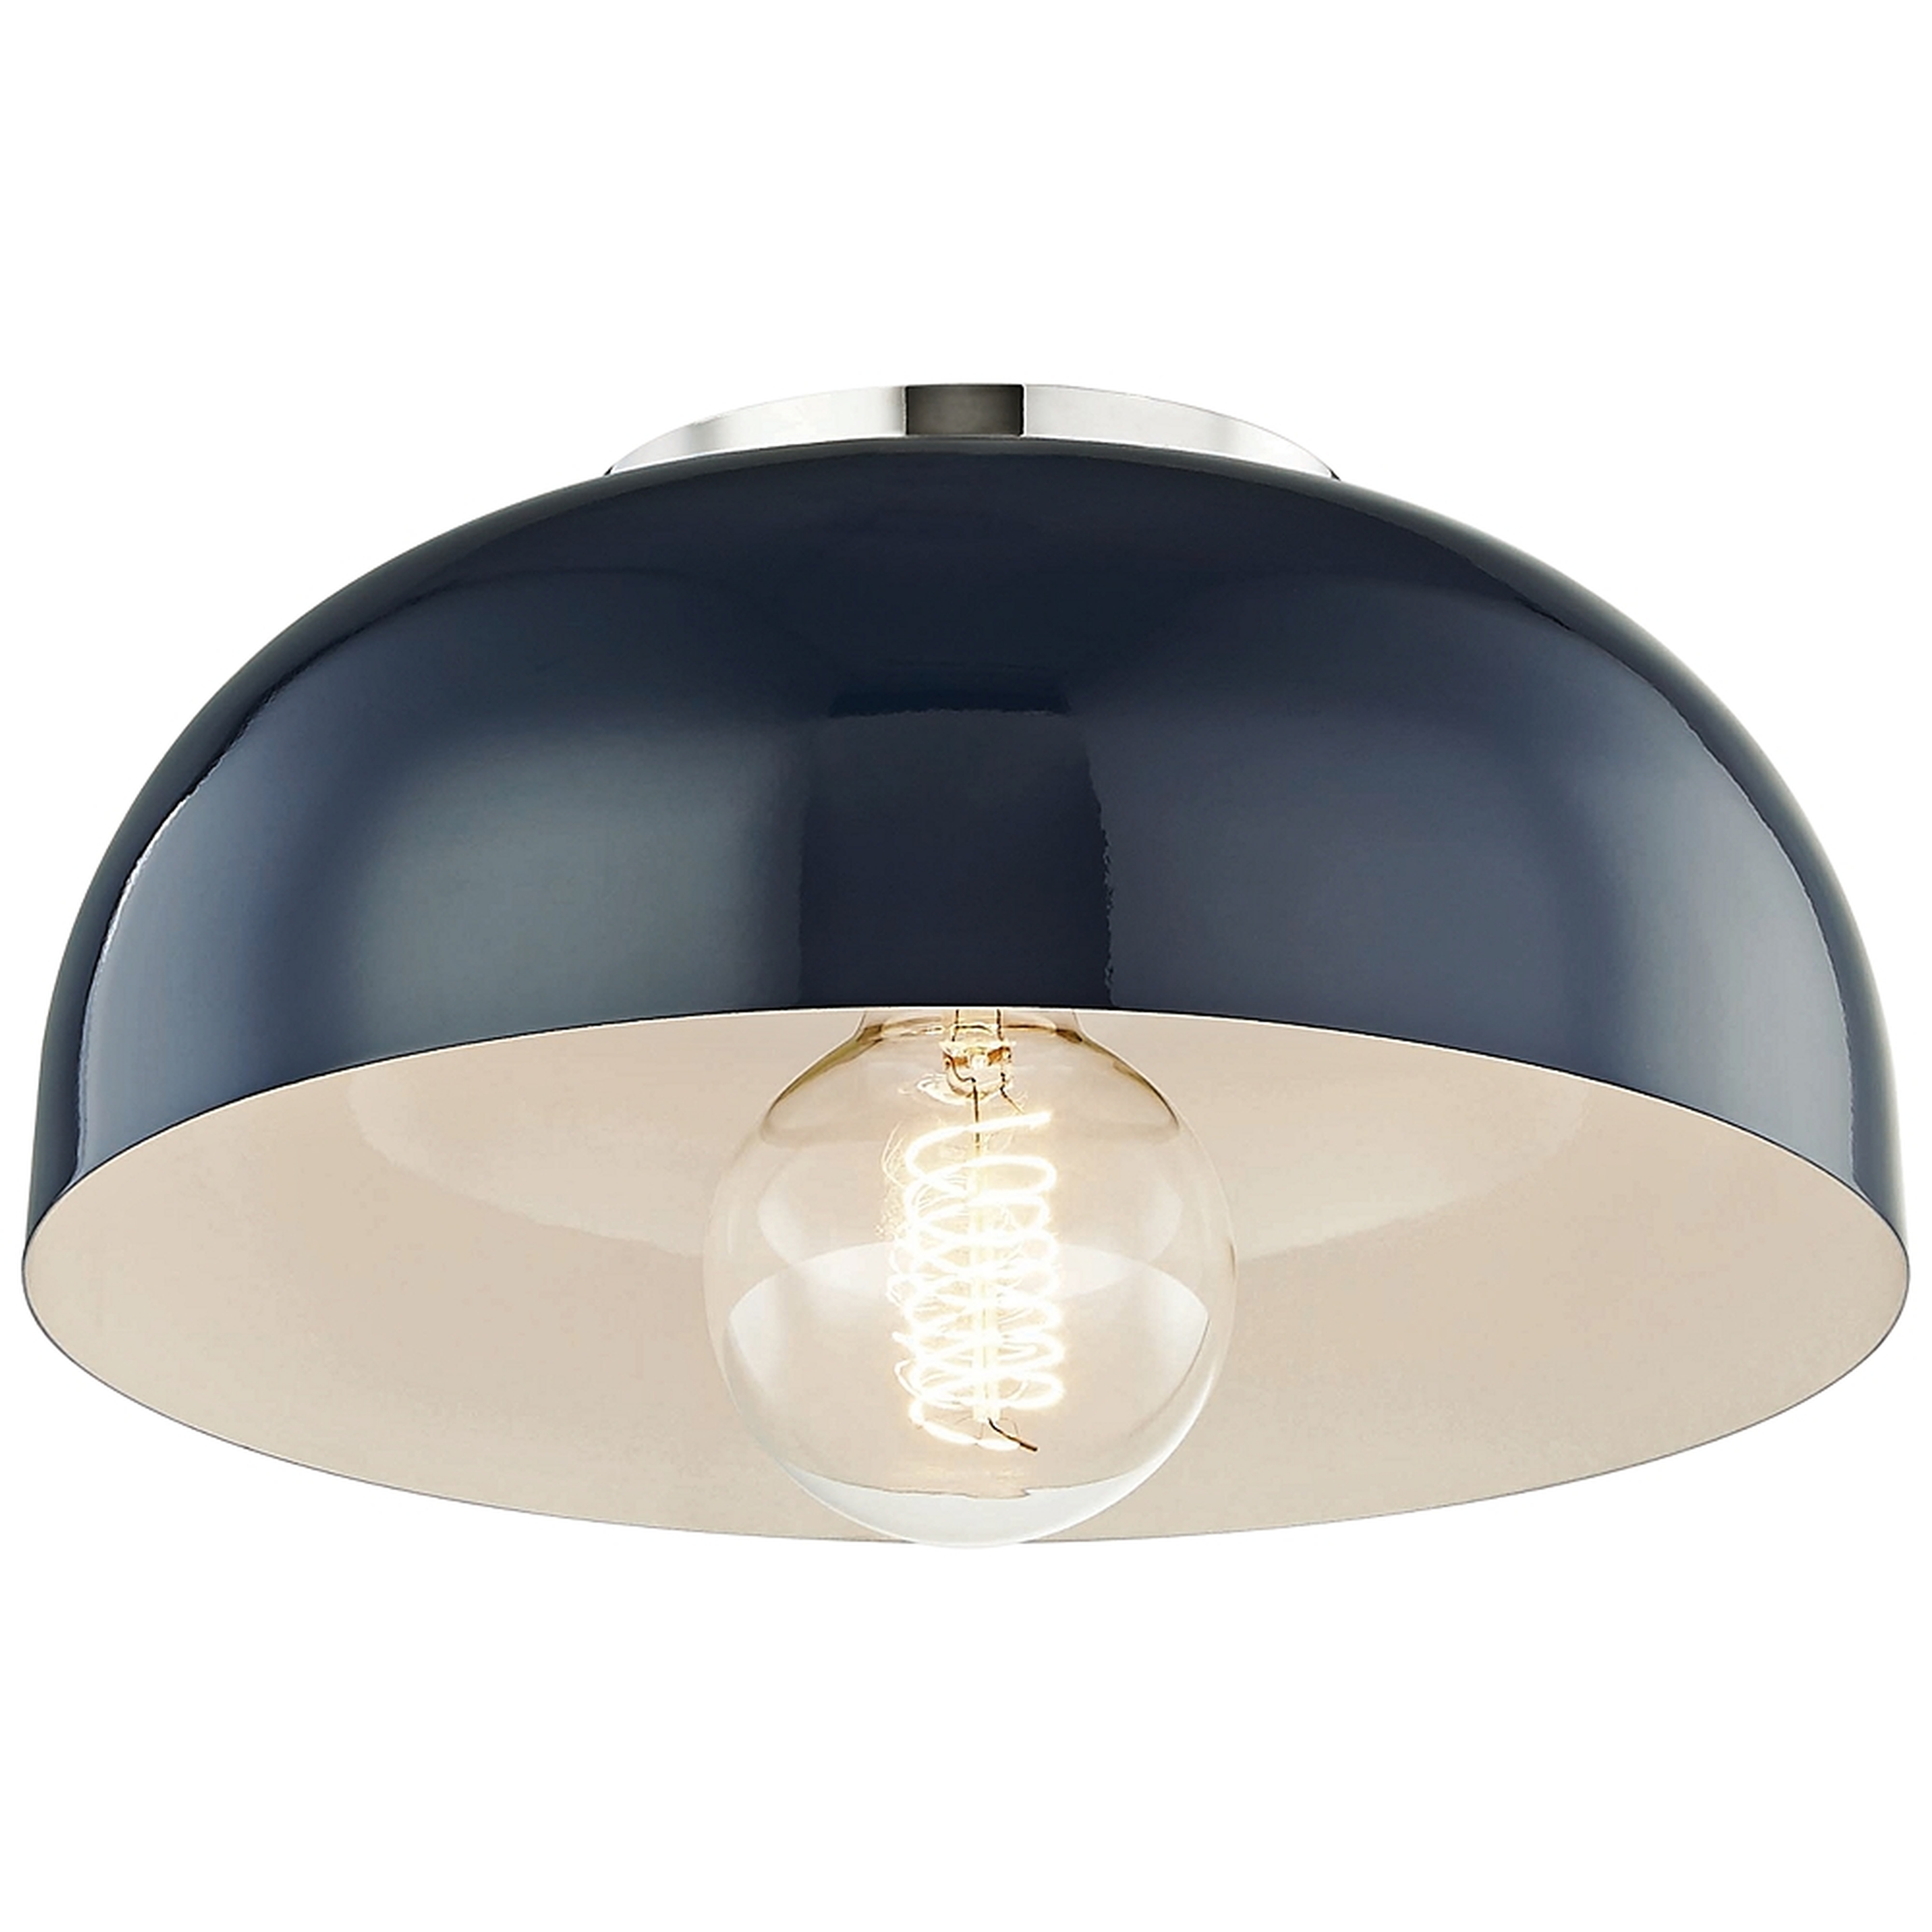 Mitzi Avery 11"W Polished Nickel Ceiling Light w/ Navy Shade - Style # 47A10 - Lamps Plus